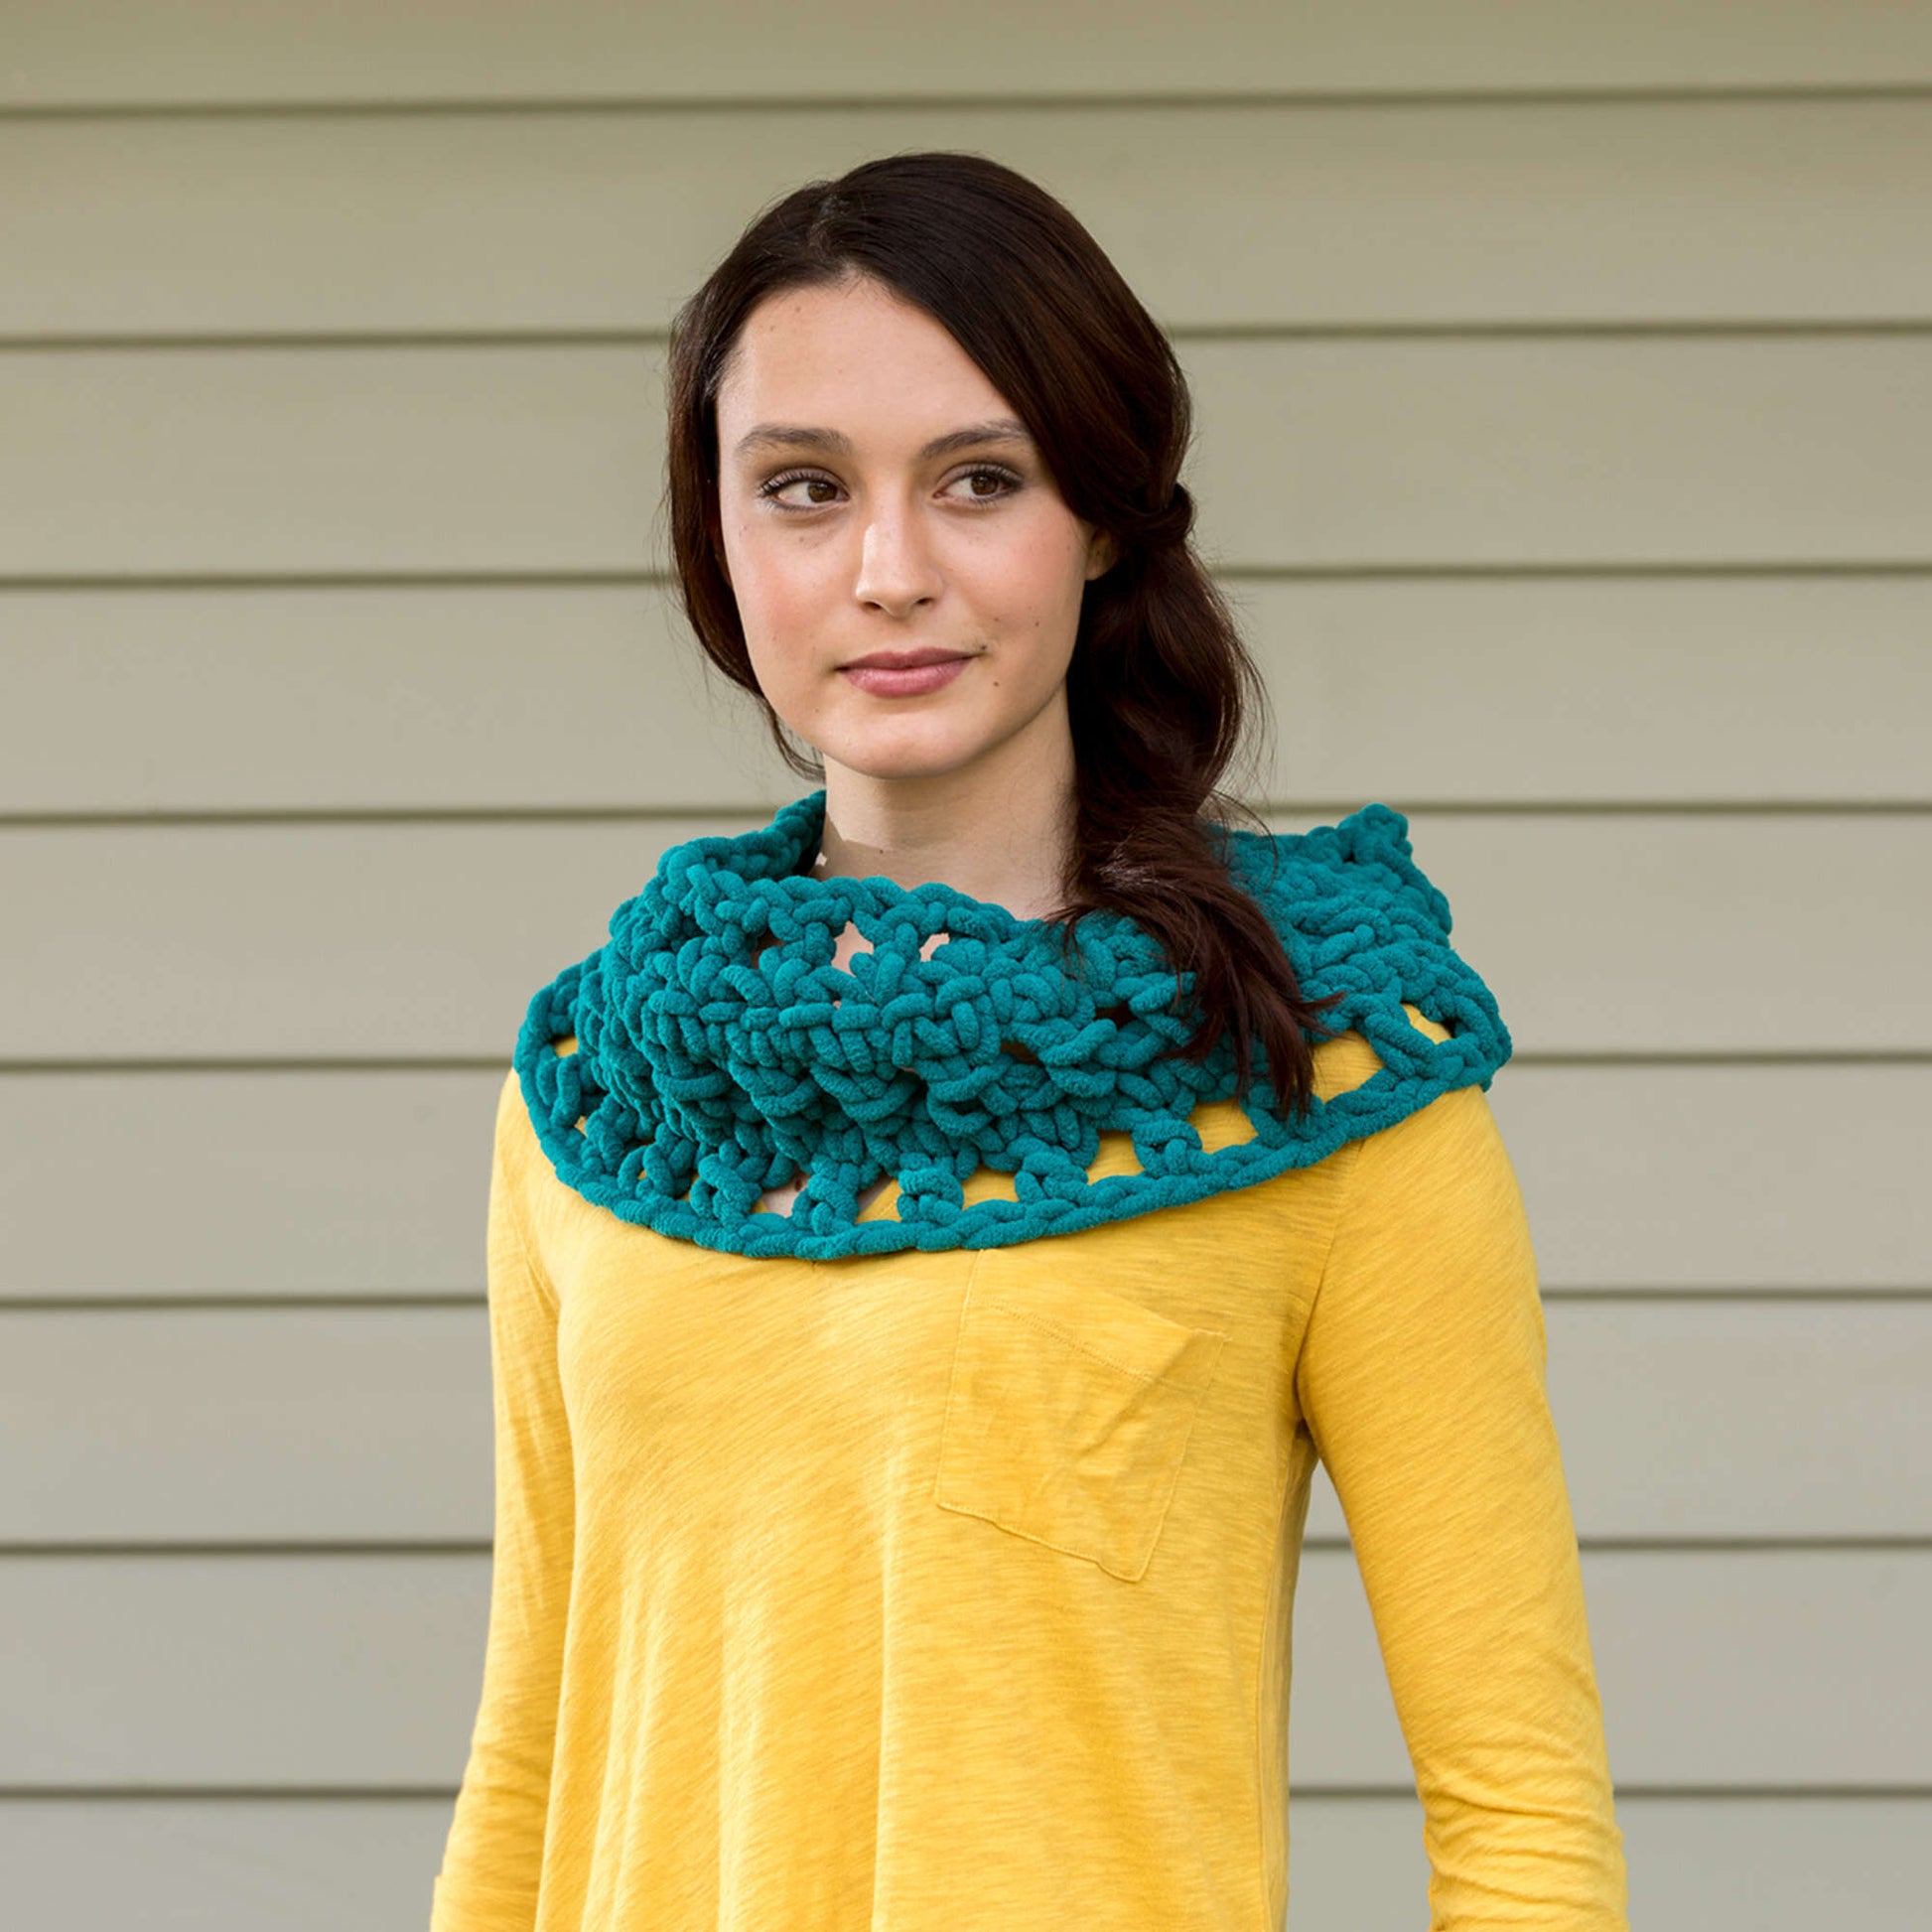 Free Red Heart Crochet Chic & Charming Cowl Pattern